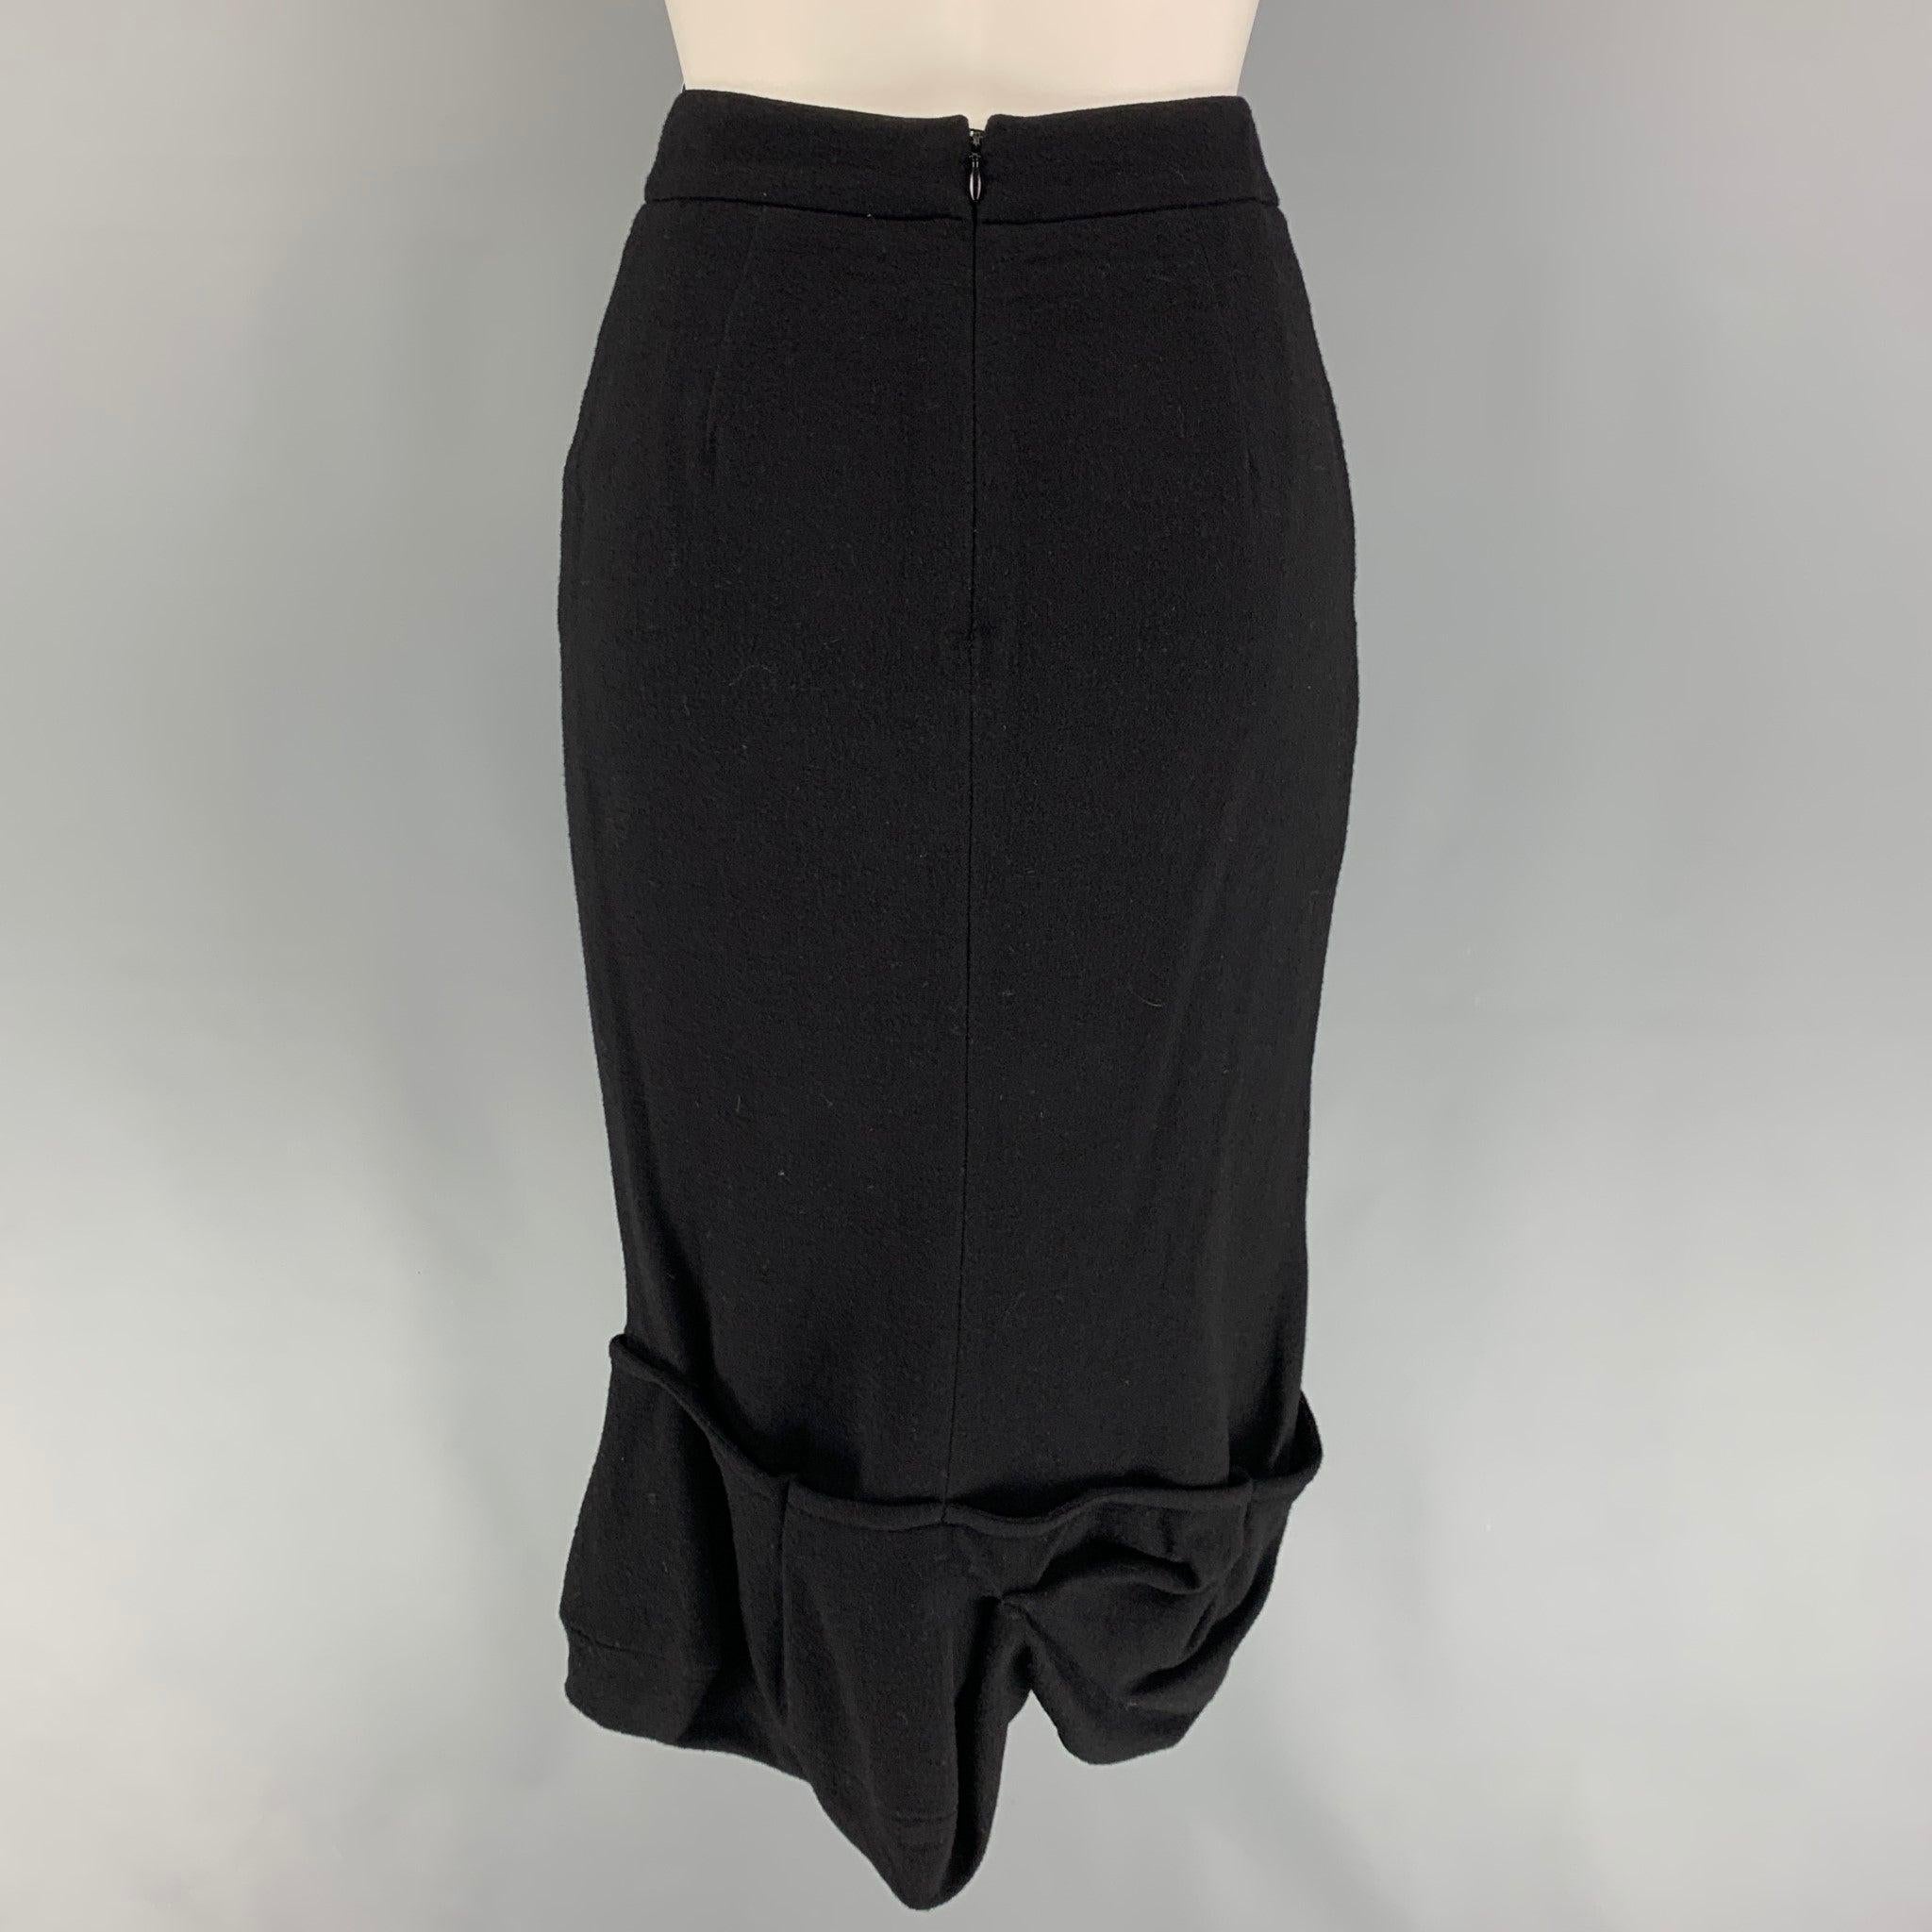 GIVENCHY Size 4 Black Wool Ruffled Pencil Mid-Calf Skirt In Good Condition For Sale In San Francisco, CA